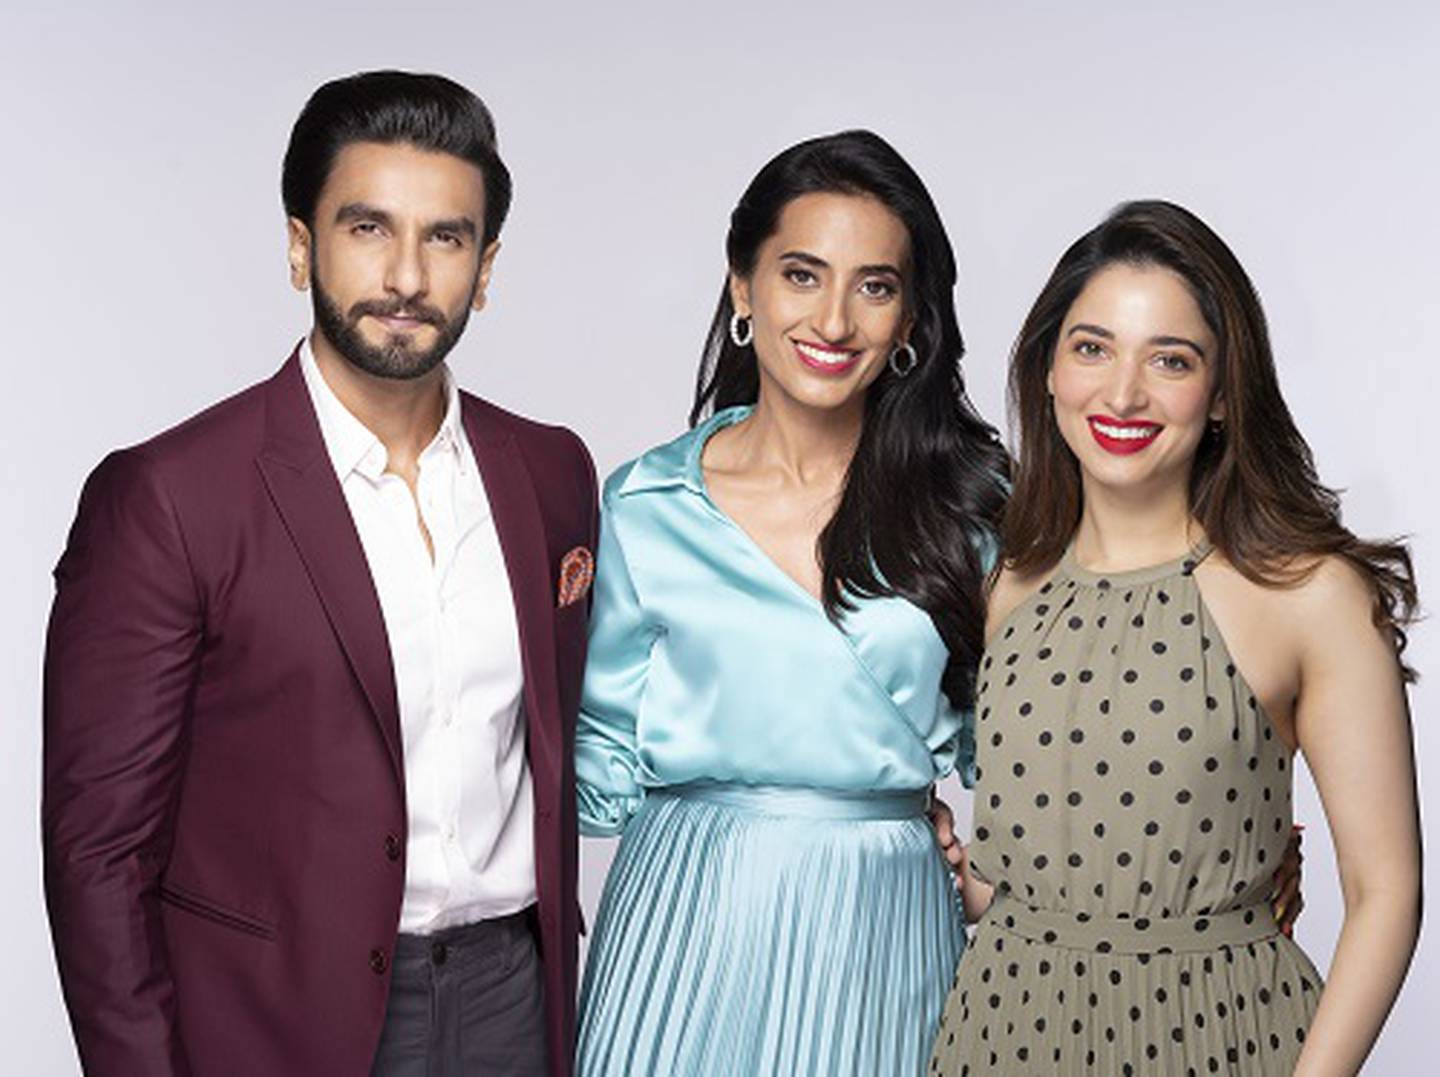 Sugar Cosmetics co-founder and CEO Vineeta Singh (C) with Bollywood actors Ranveer Singh (L) and Tamannaah Bhatia (R), who are investors in the company.